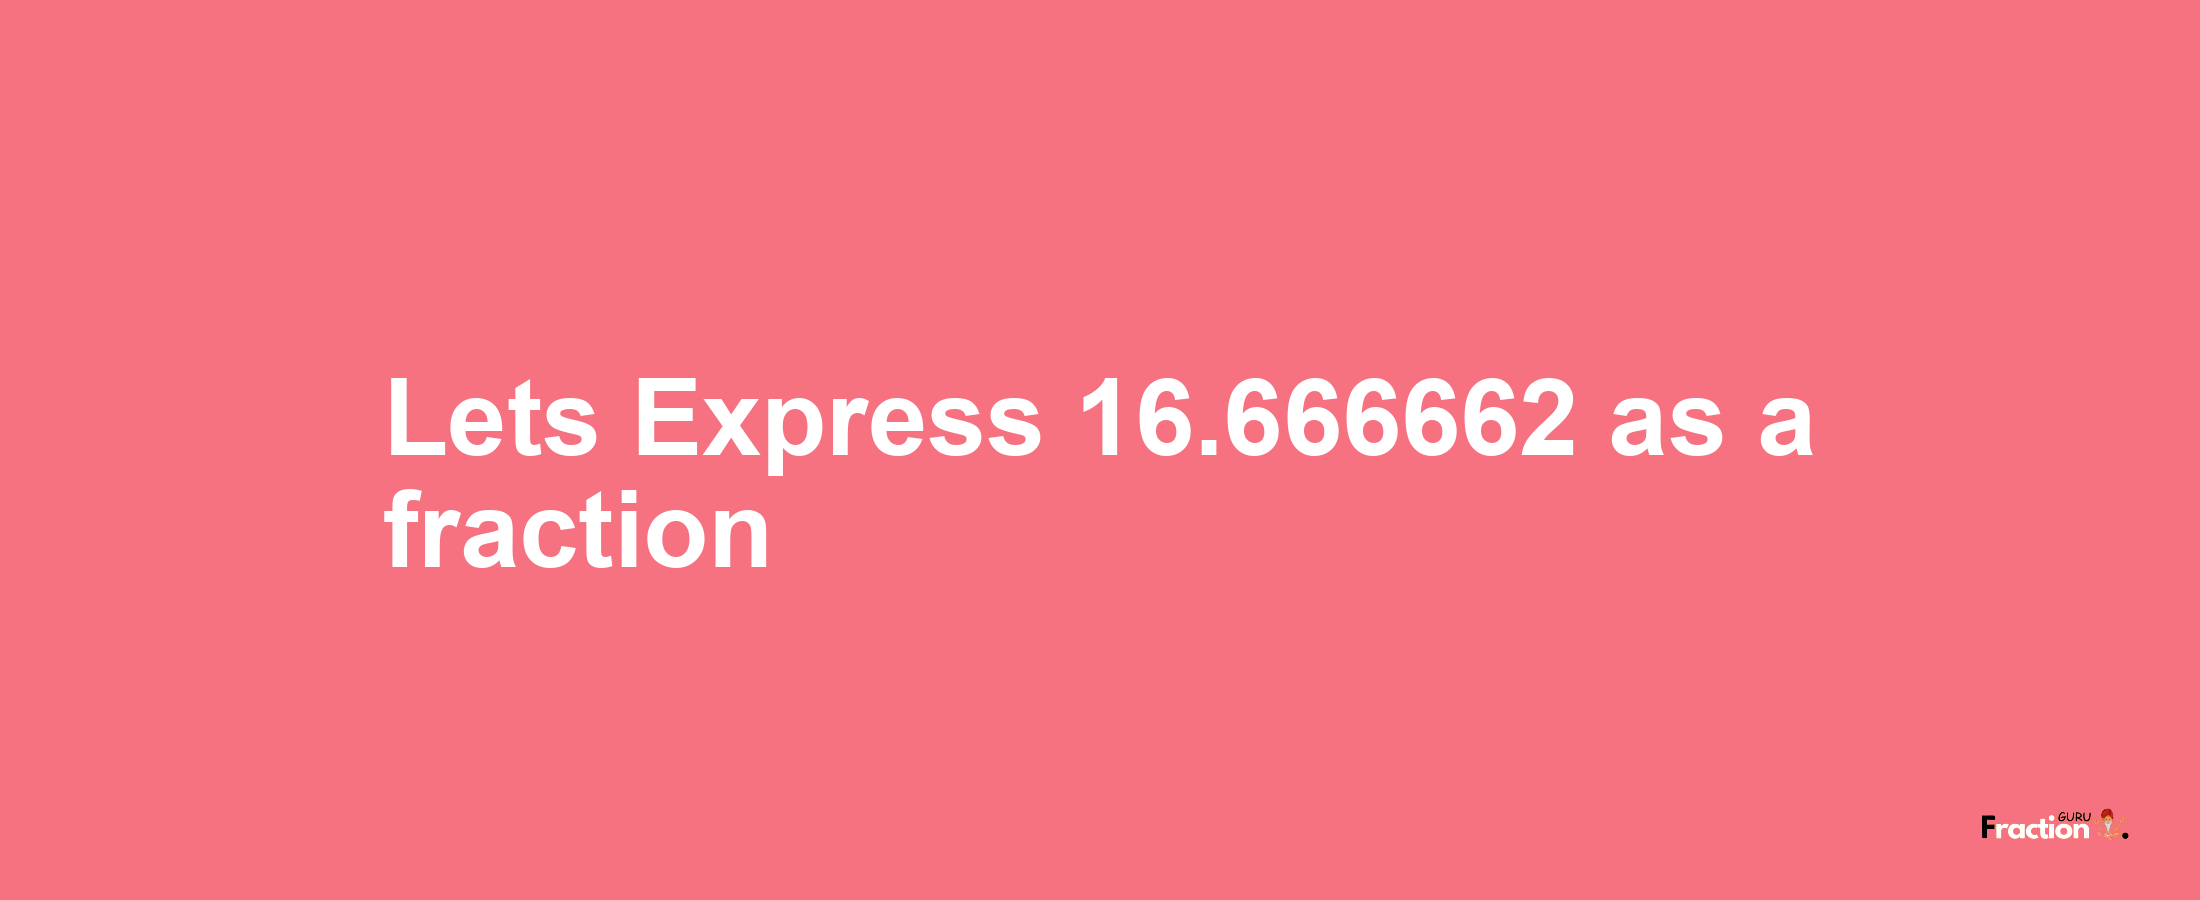 Lets Express 16.666662 as afraction